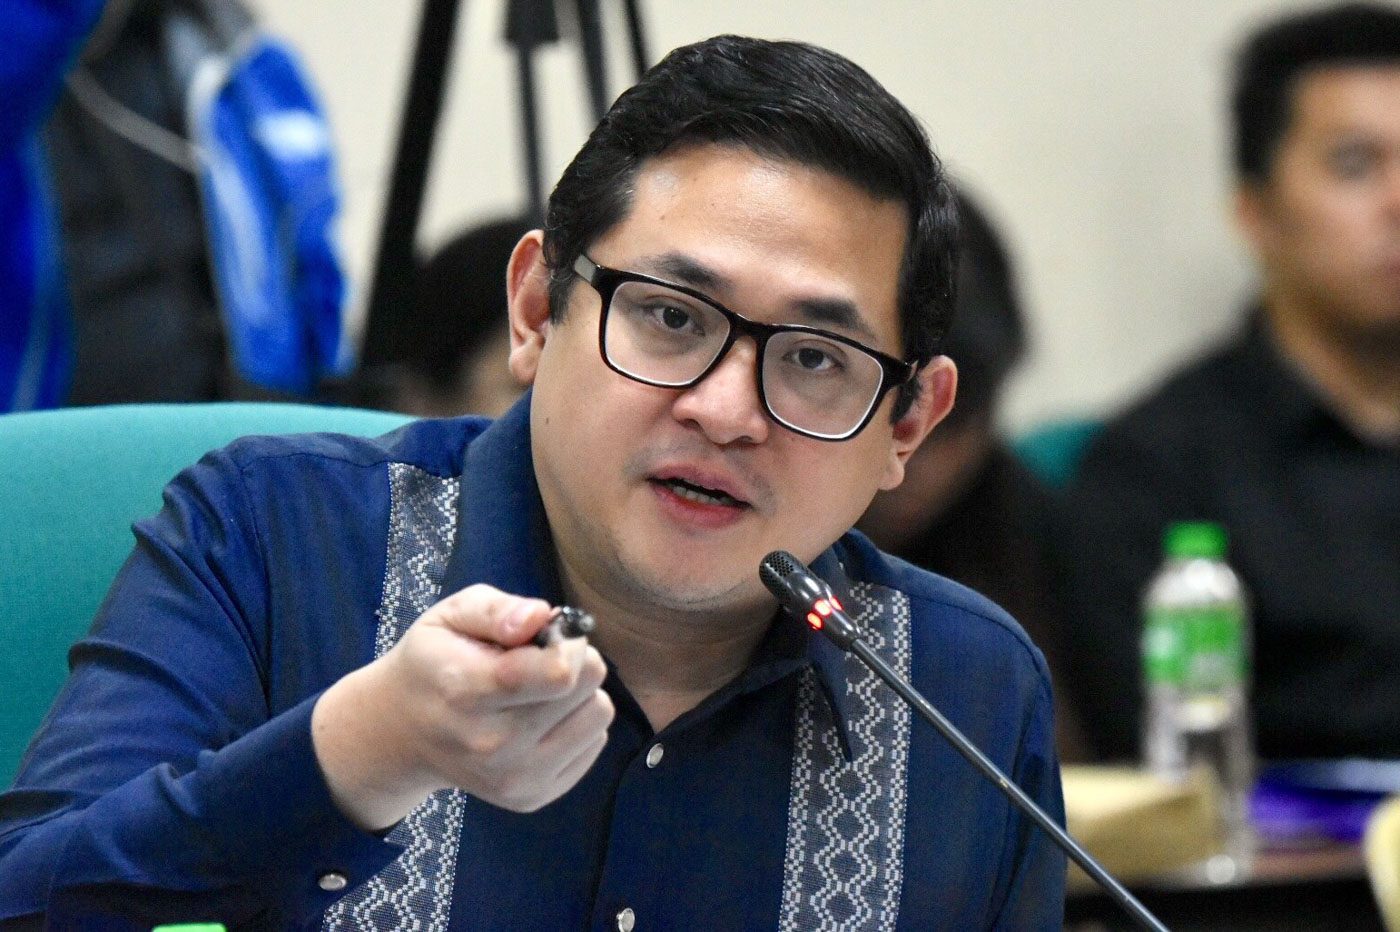 Imports to address inflation? Support farmers instead – Bam Aquino